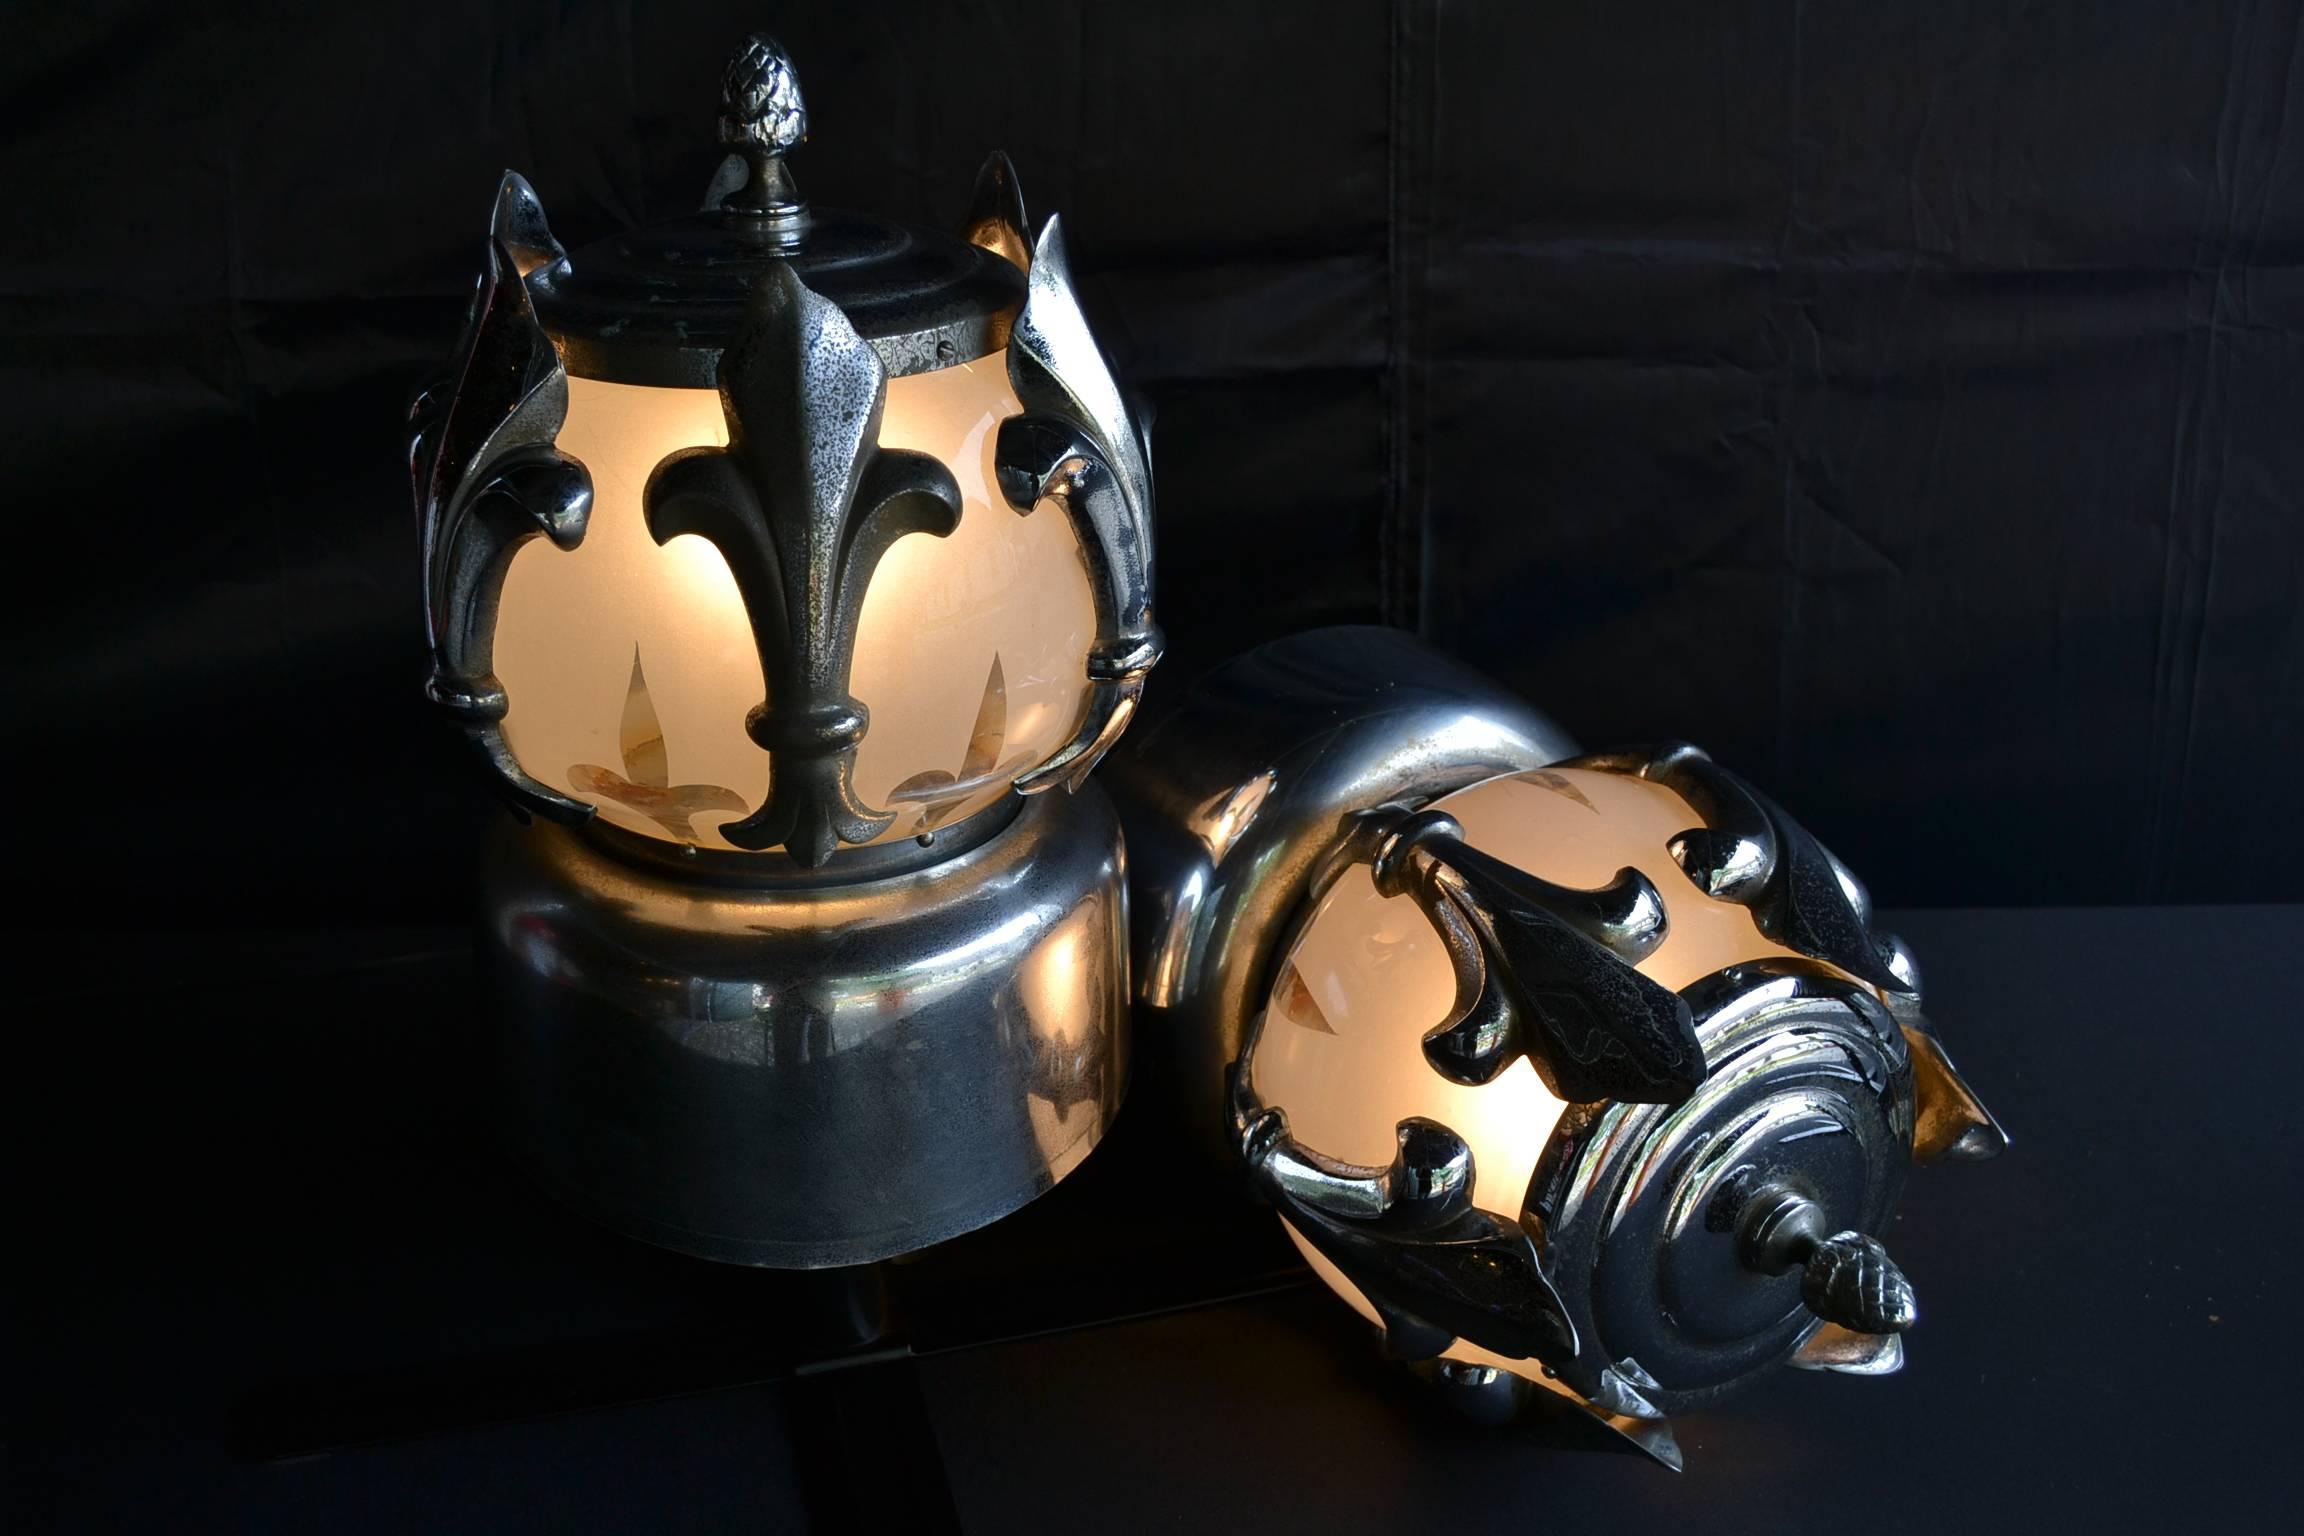 Four residential hearse lights from the early 20th century.
These types of lights were only used for the noble or royal funerals, so very hard to find as they are rare.
Handmade and real piece of art. Heavy solid copper and chrome with the